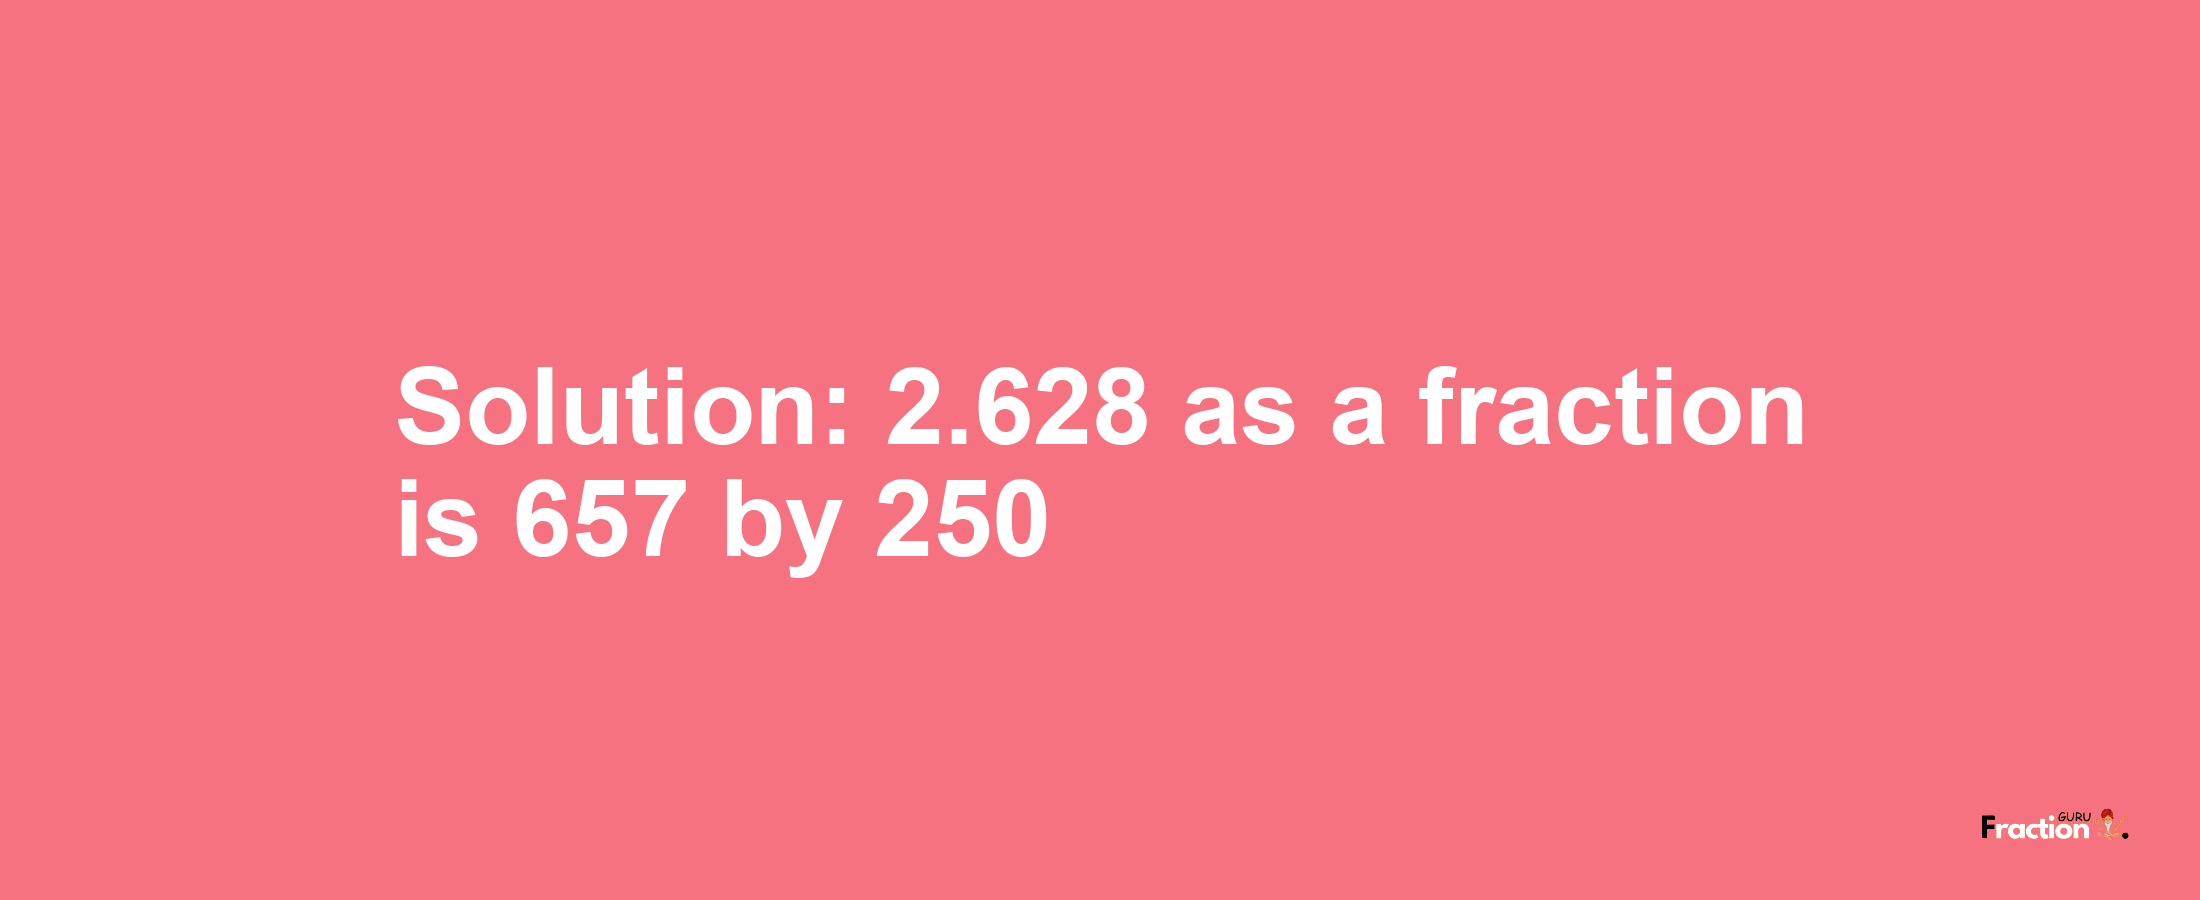 Solution:2.628 as a fraction is 657/250